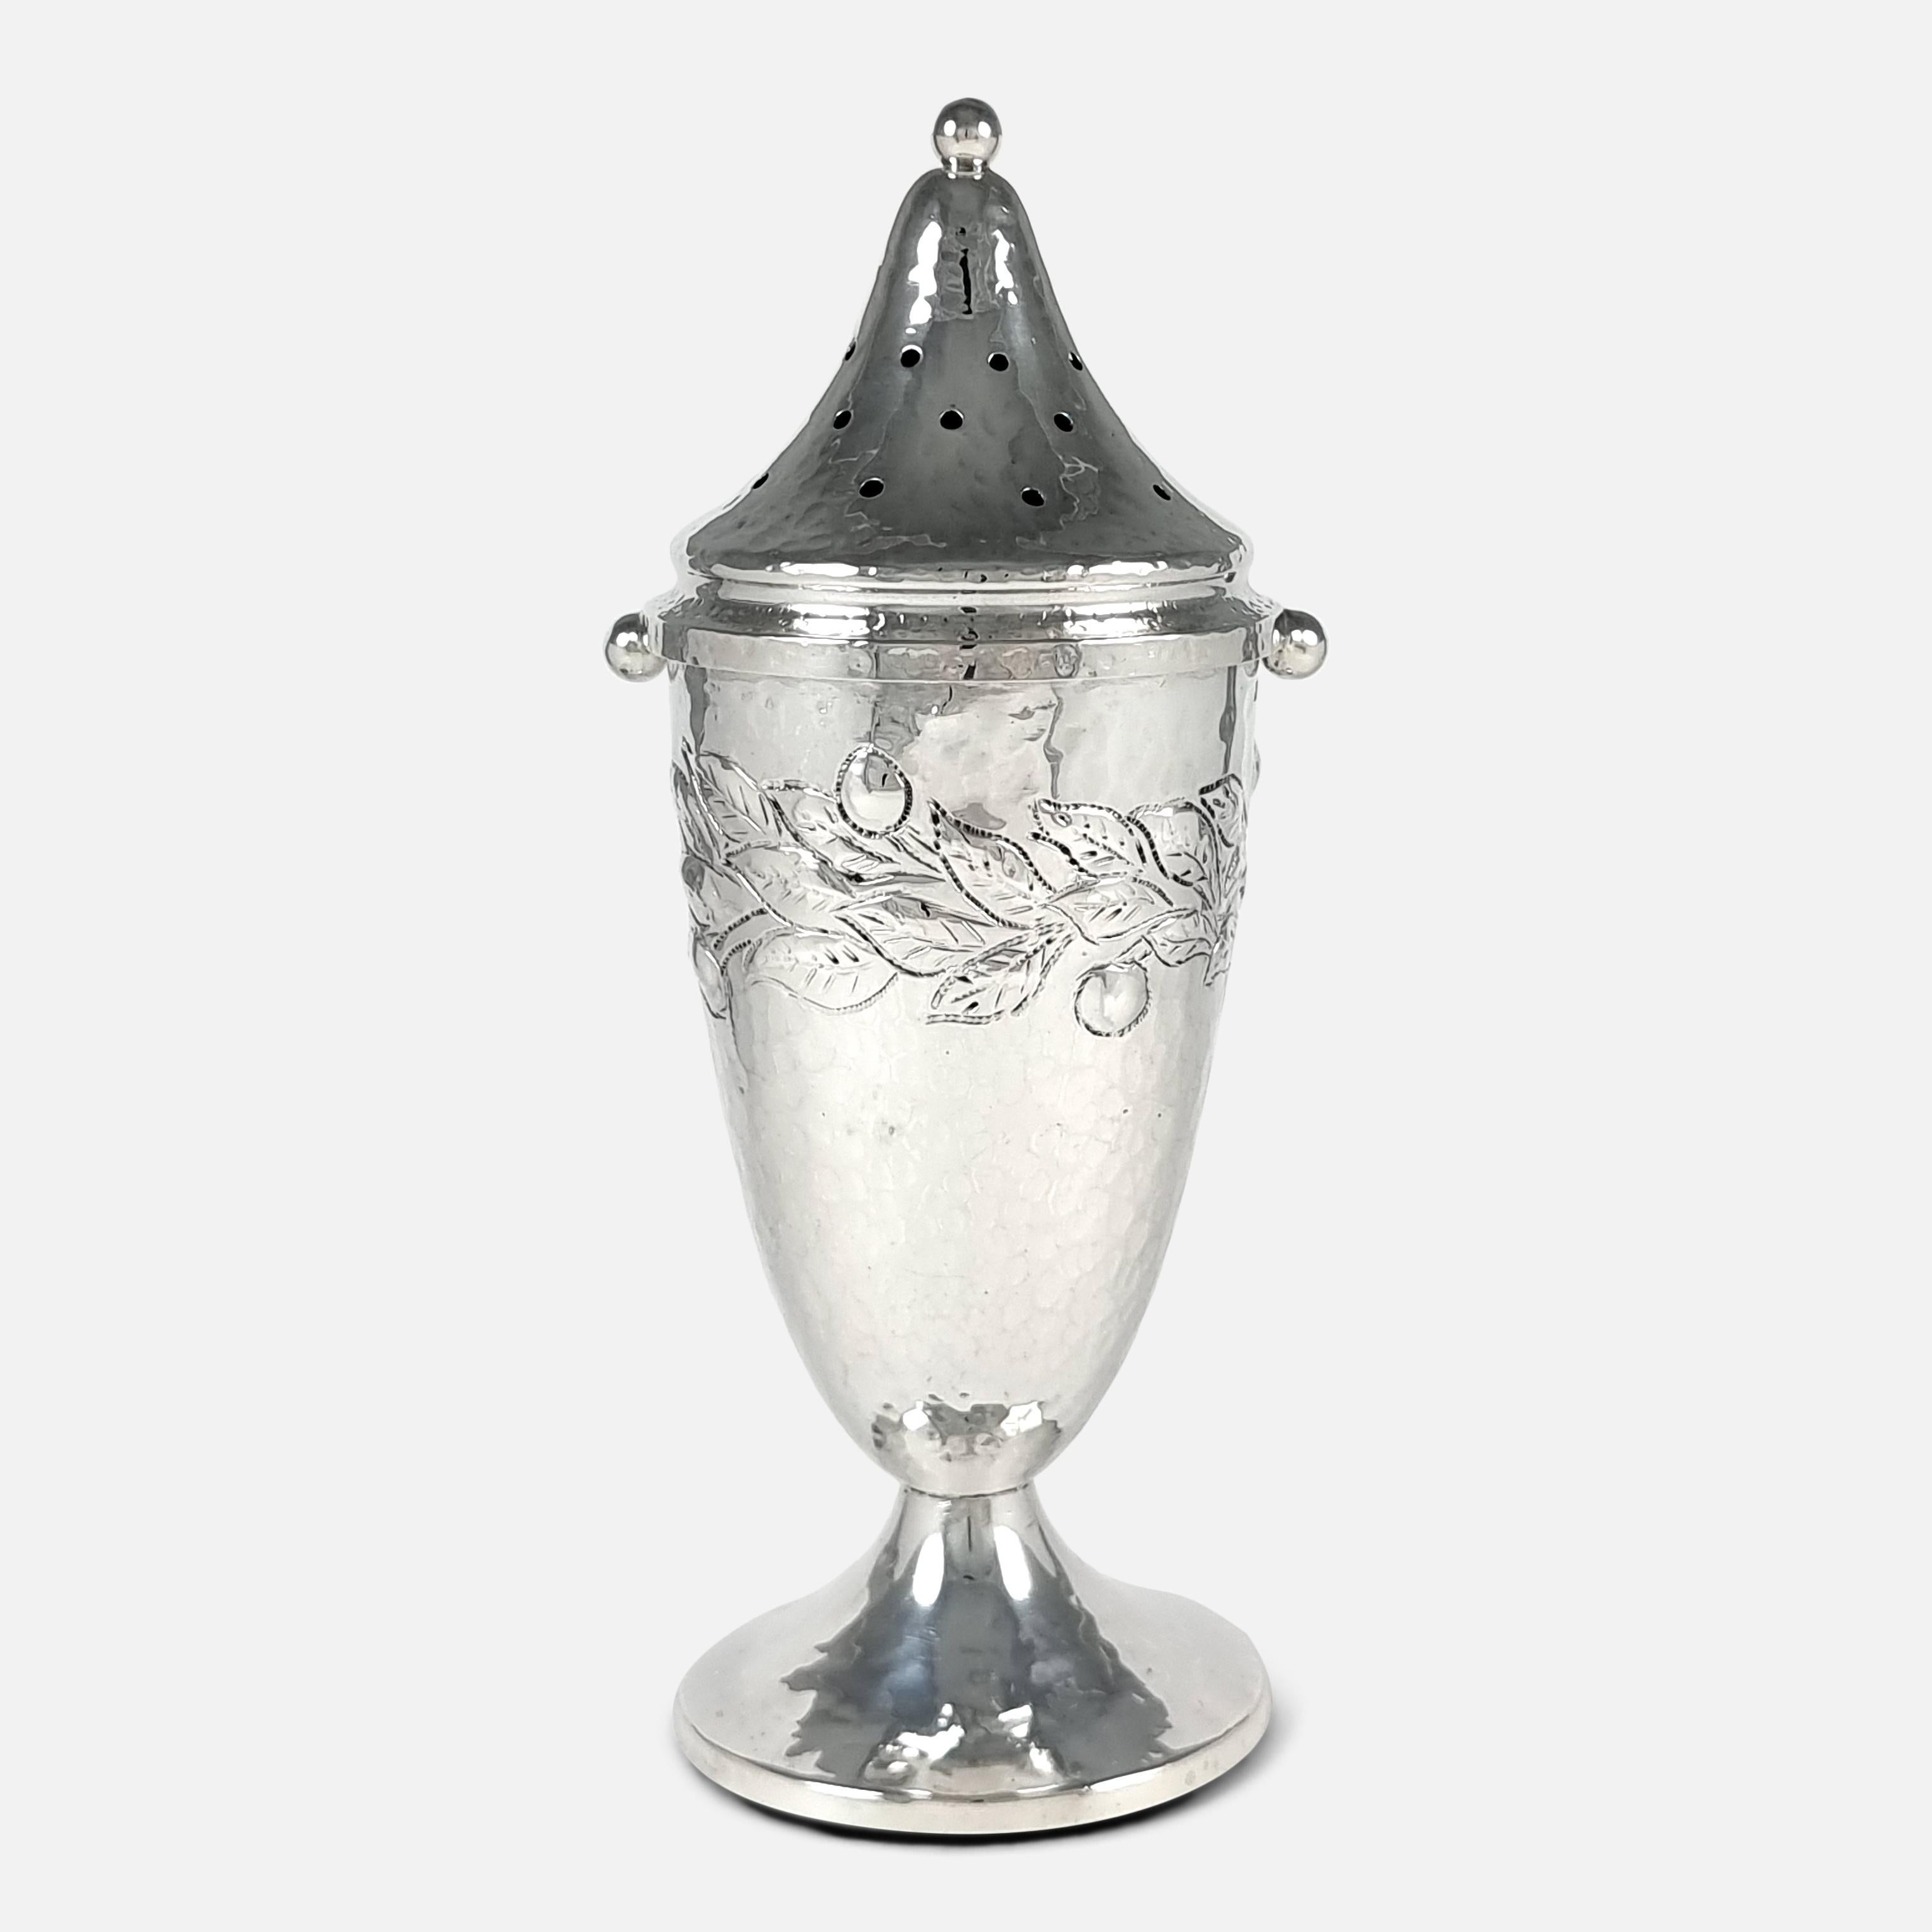 An Arts and Crafts sterling silver sugar caster. The sugar caster is of tapering circular form, spot-hammered decoration, embossed with a foliate girdle, bayonet fitting domed pierced cover with a ball finial, on a spreading circular foot, and